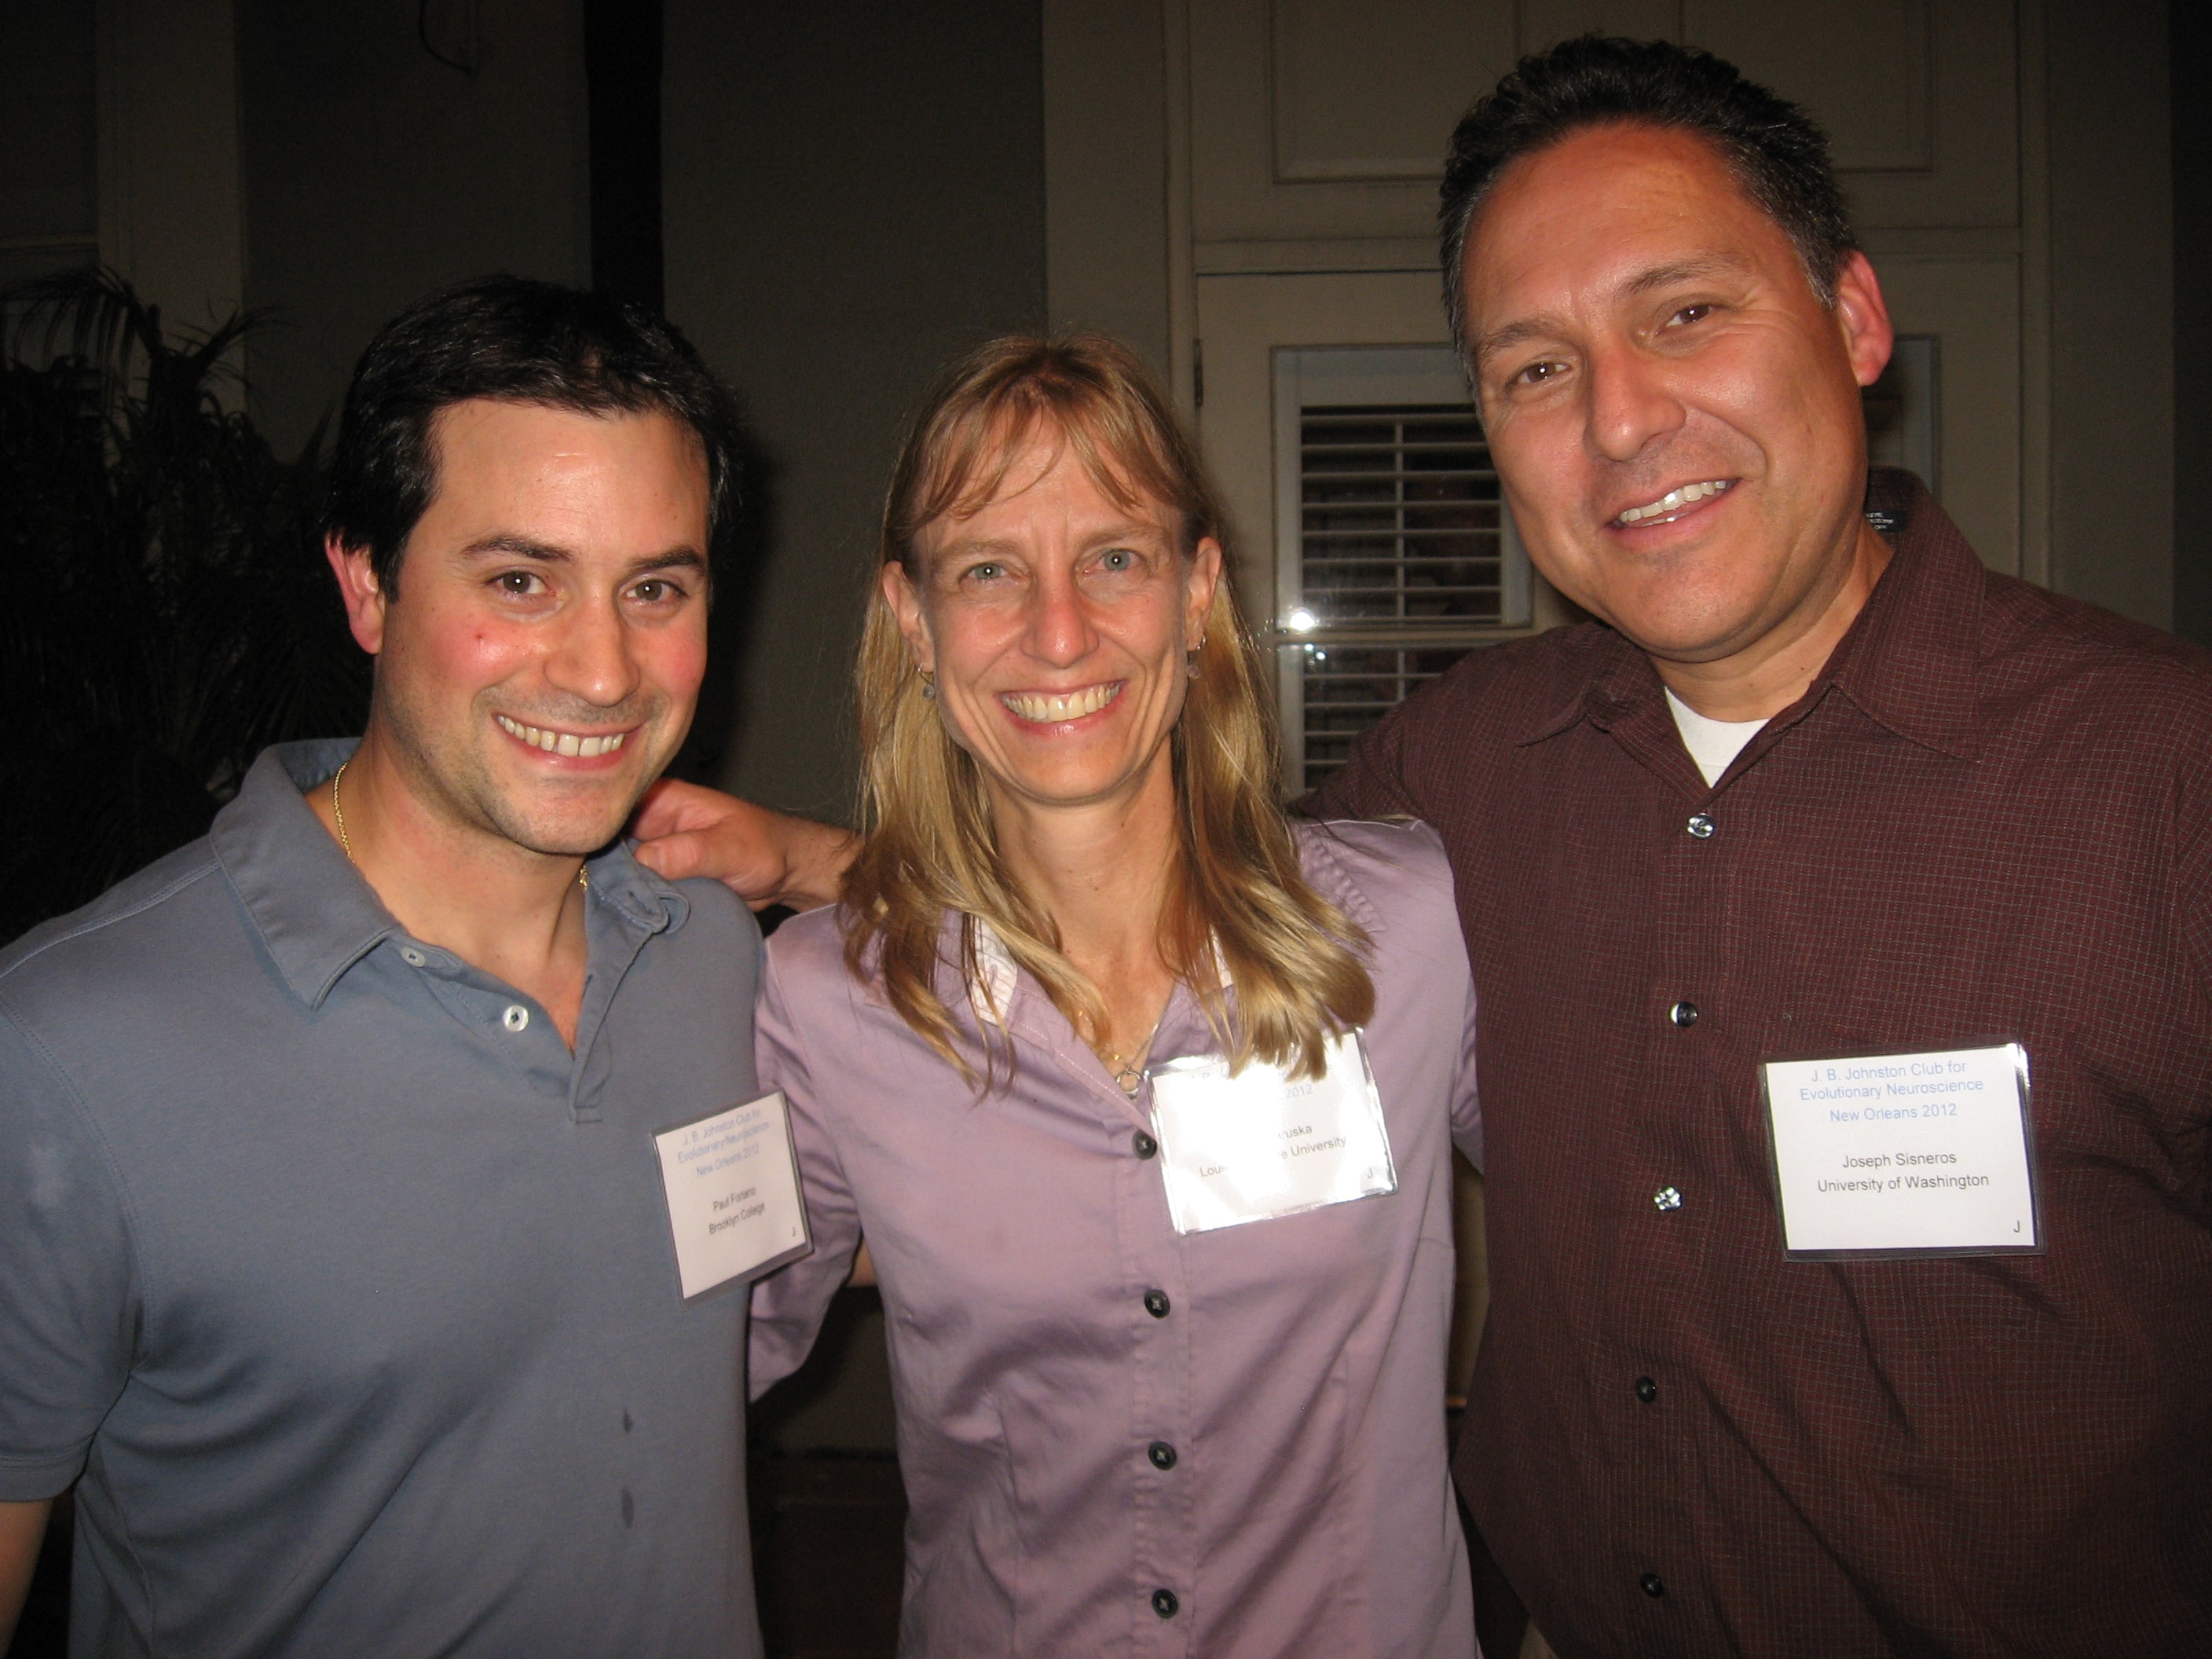 Paul Forlano, Karen, and Joe Sisneros at the Society for Neuroscience Meeting in New Orleans 2012